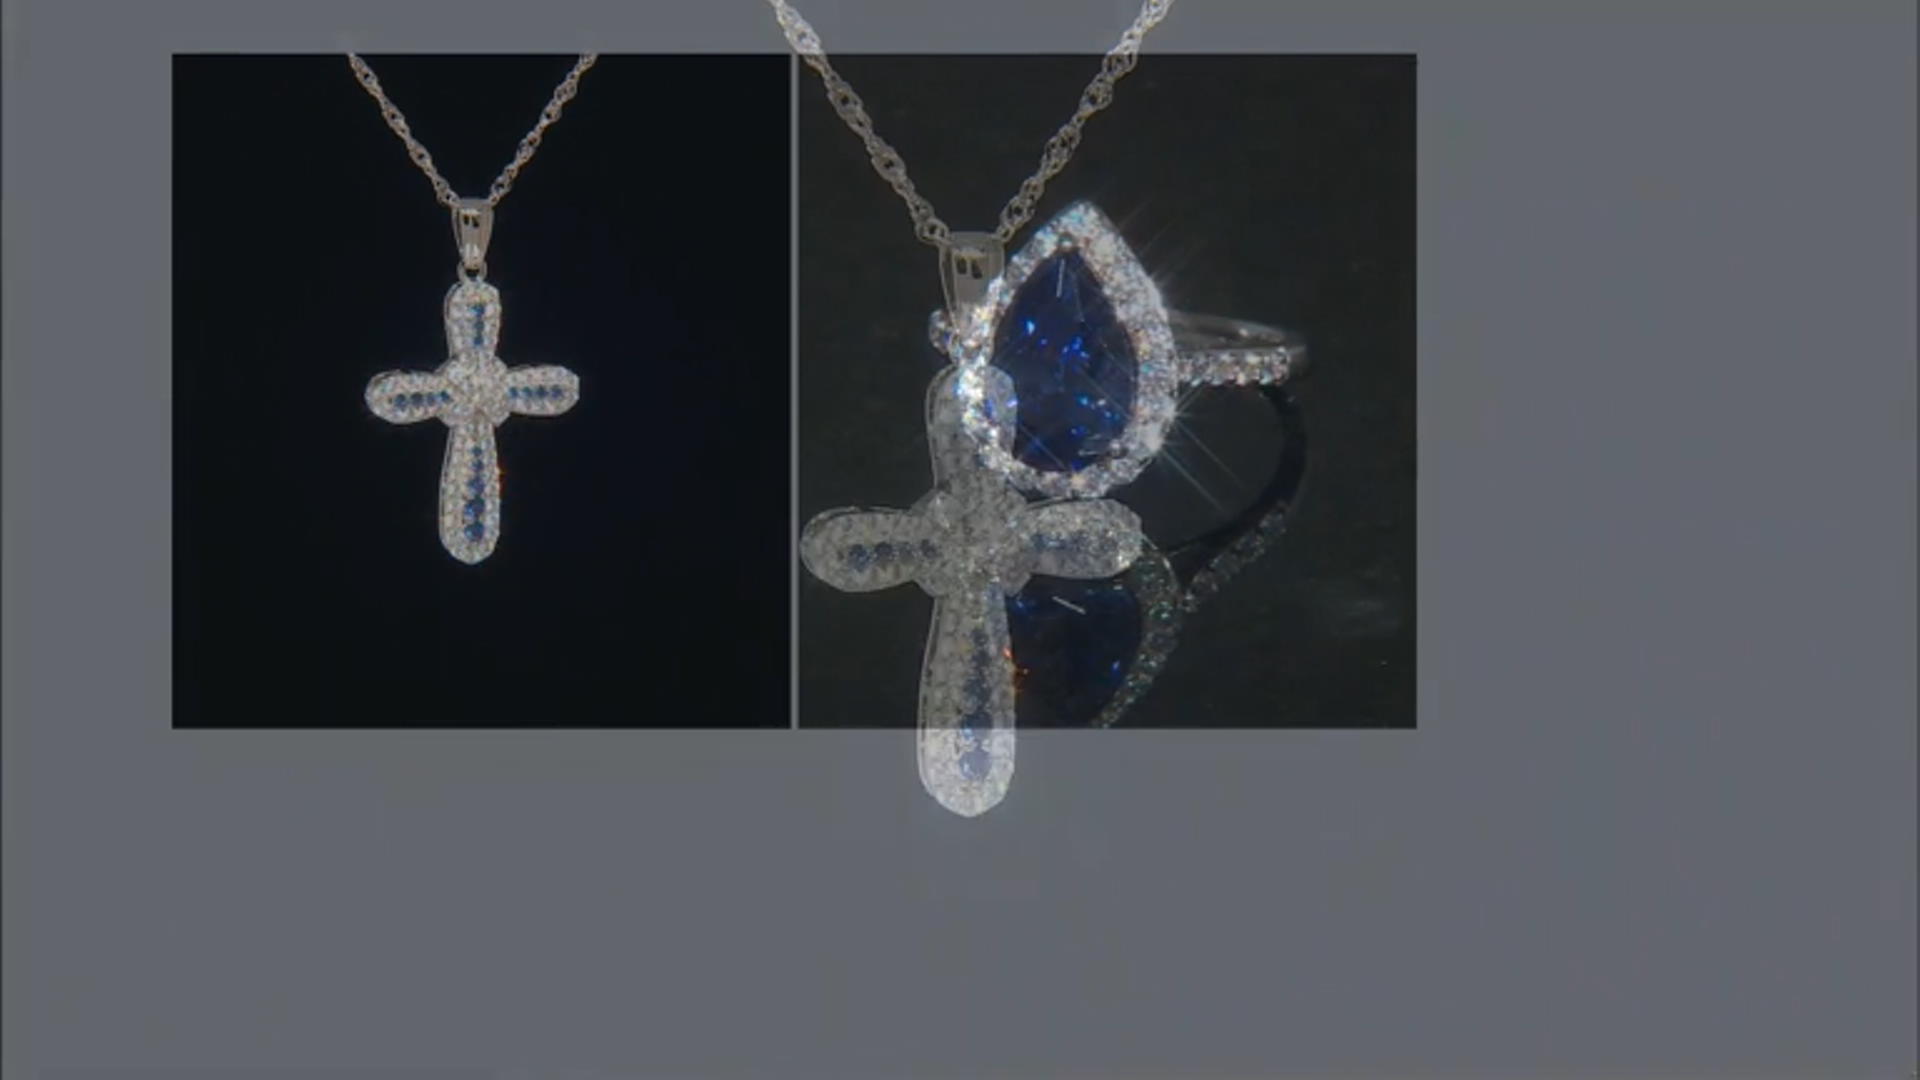 Blue And White Cubic Zirconia Platinum Over Sterling Silver Cross Pendant With Chain 1.68ctw Video Thumbnail